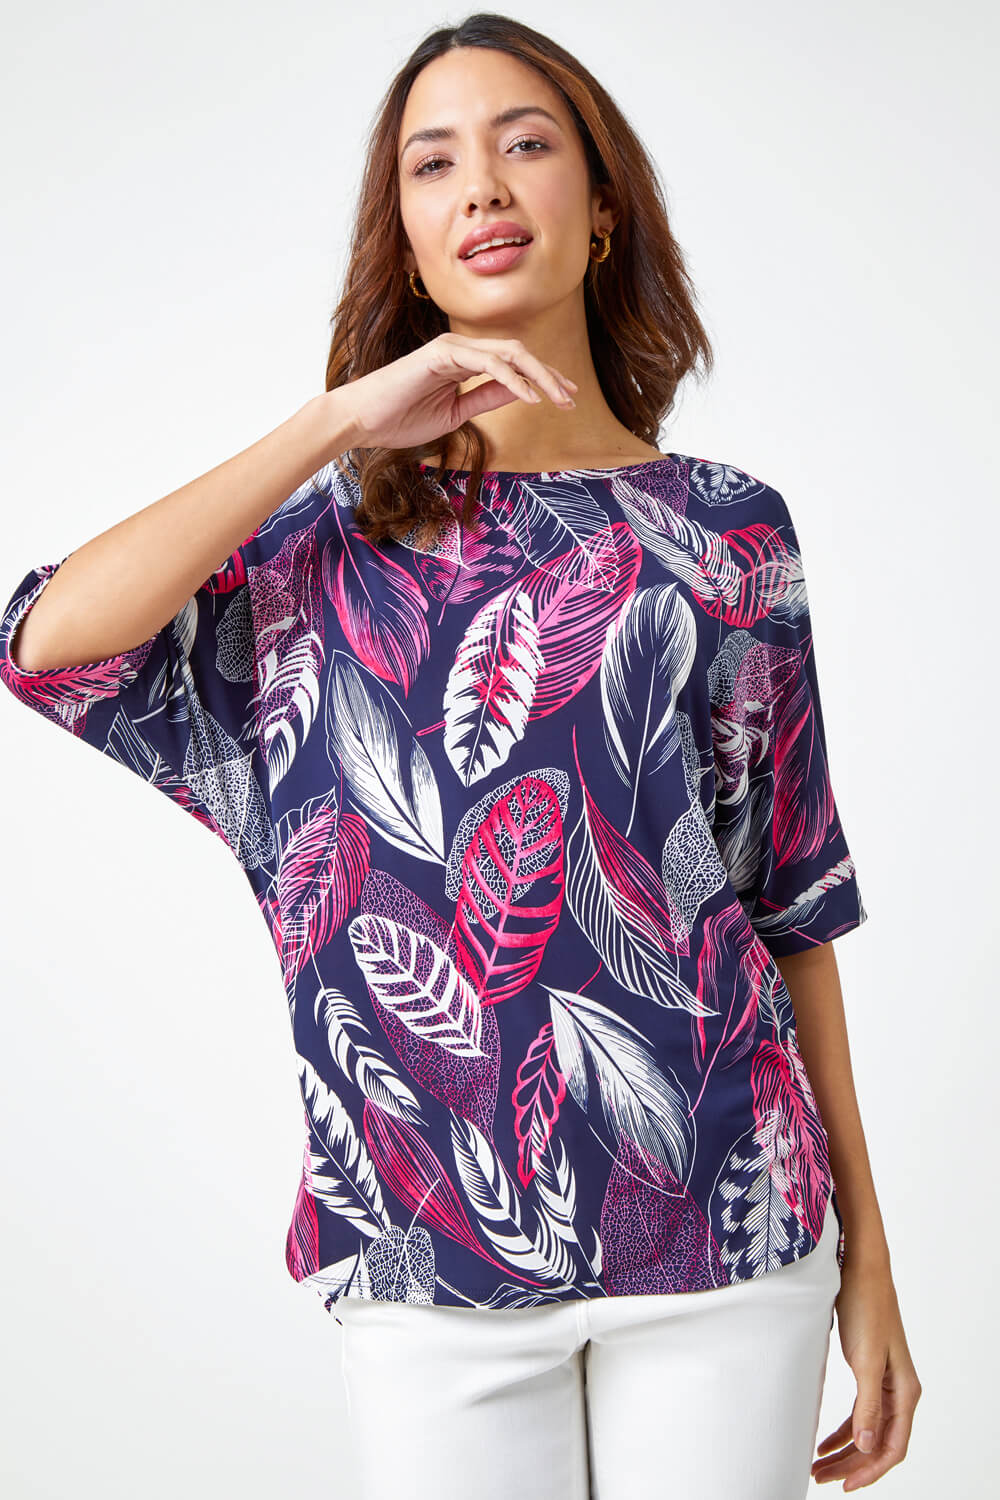 PINK Leaf Print Textured Tunic Top, Image 2 of 5